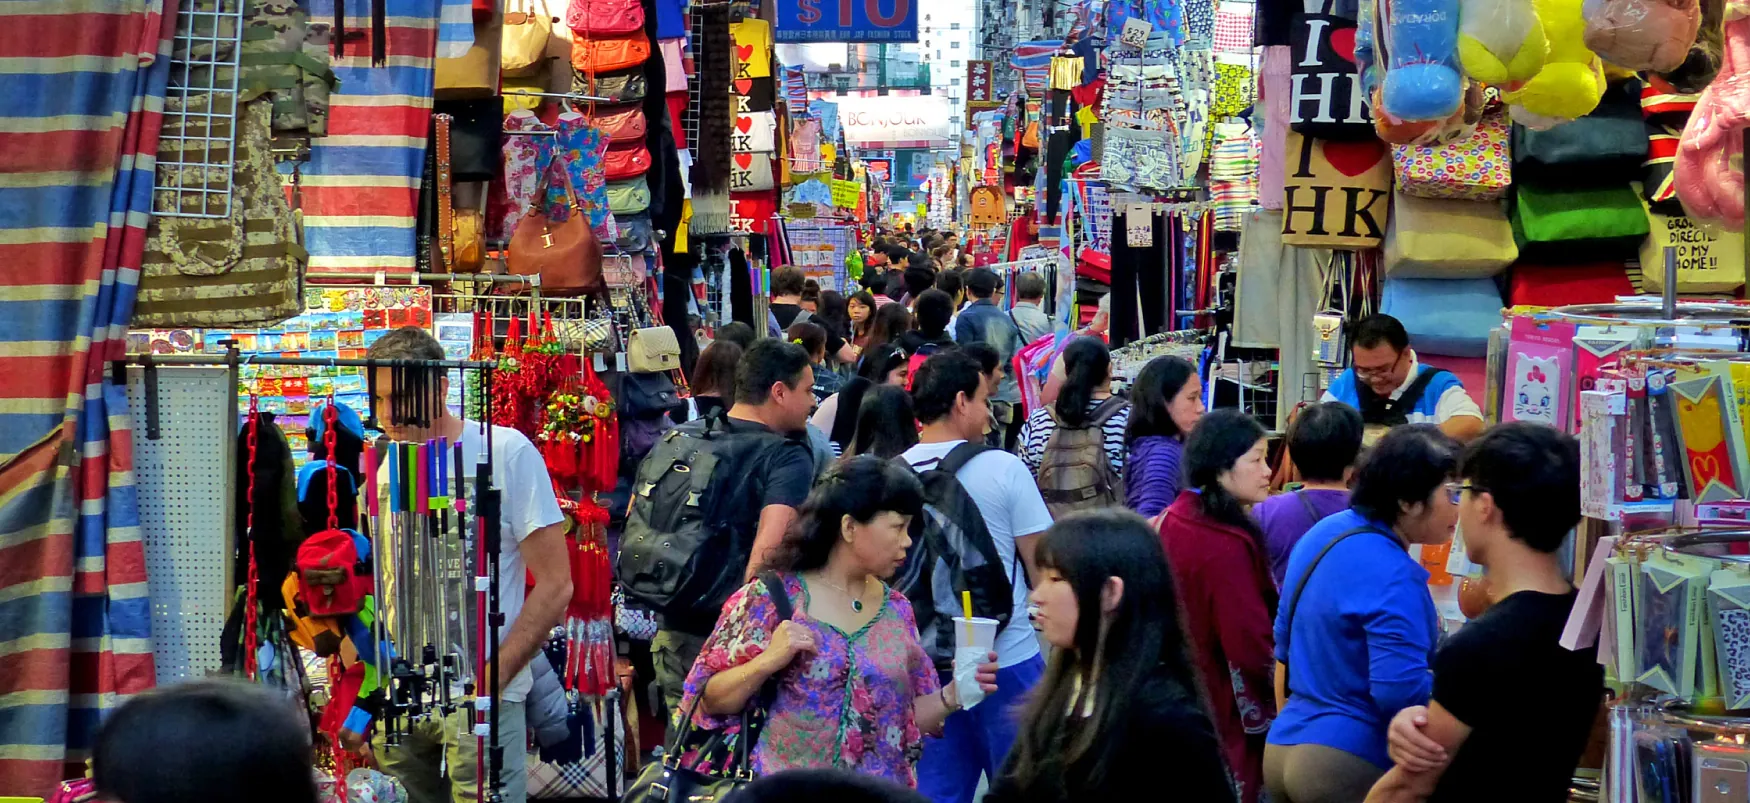 A large crowd of people walk through a street market. Bags, jewelry, and other items available for sale are visible.